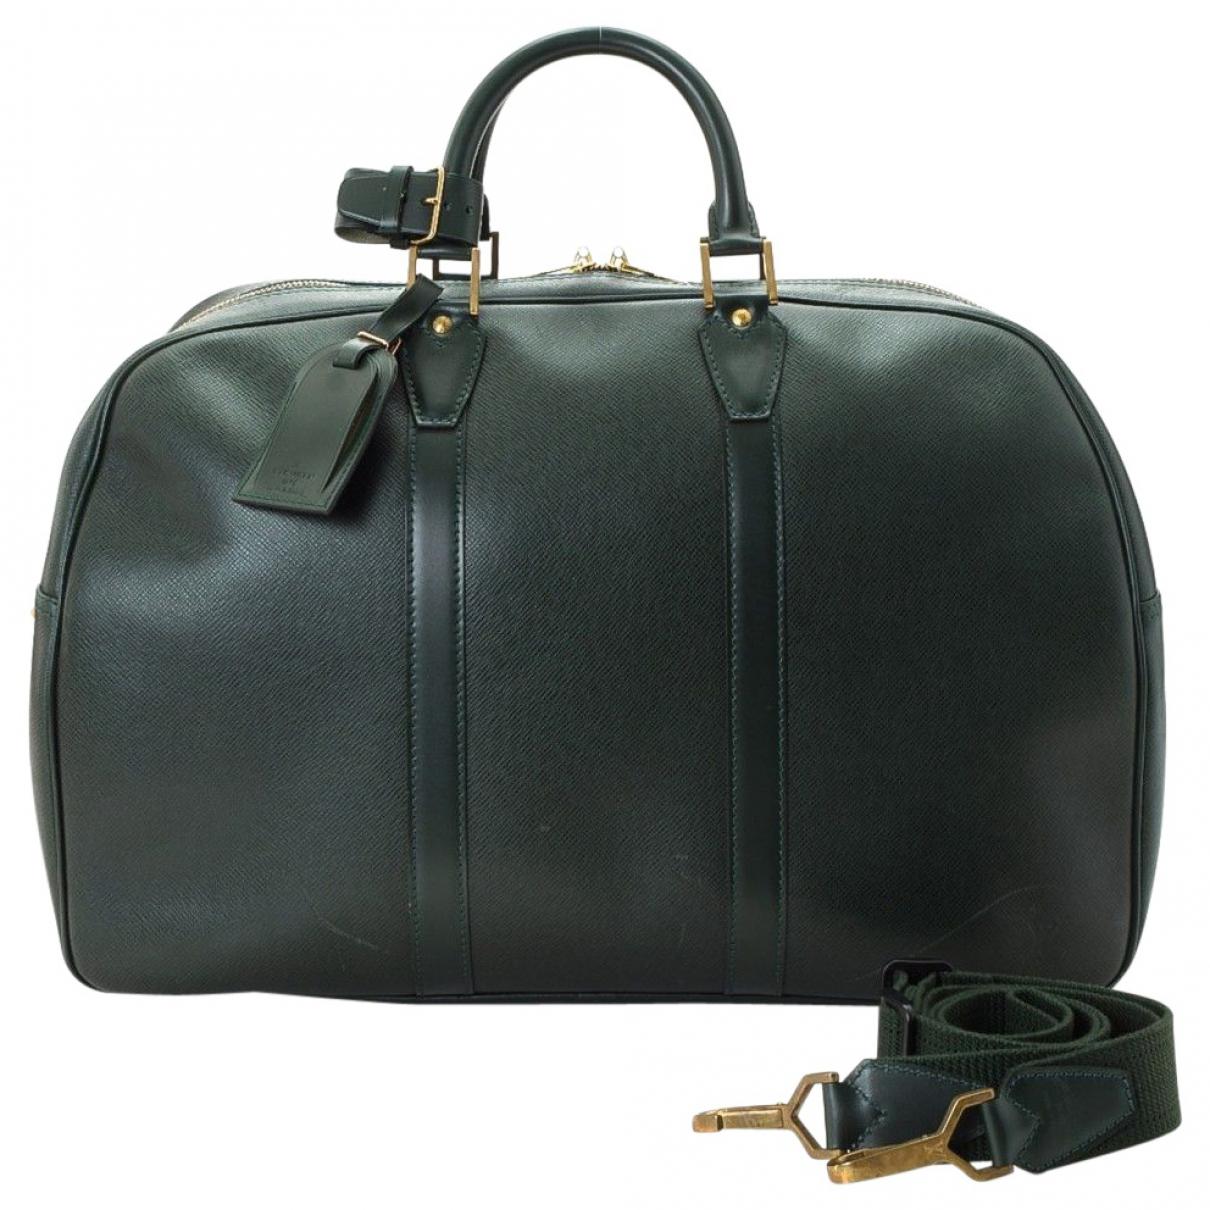 Louis Vuitton Leather Weekend Bag in Green for Men - Lyst